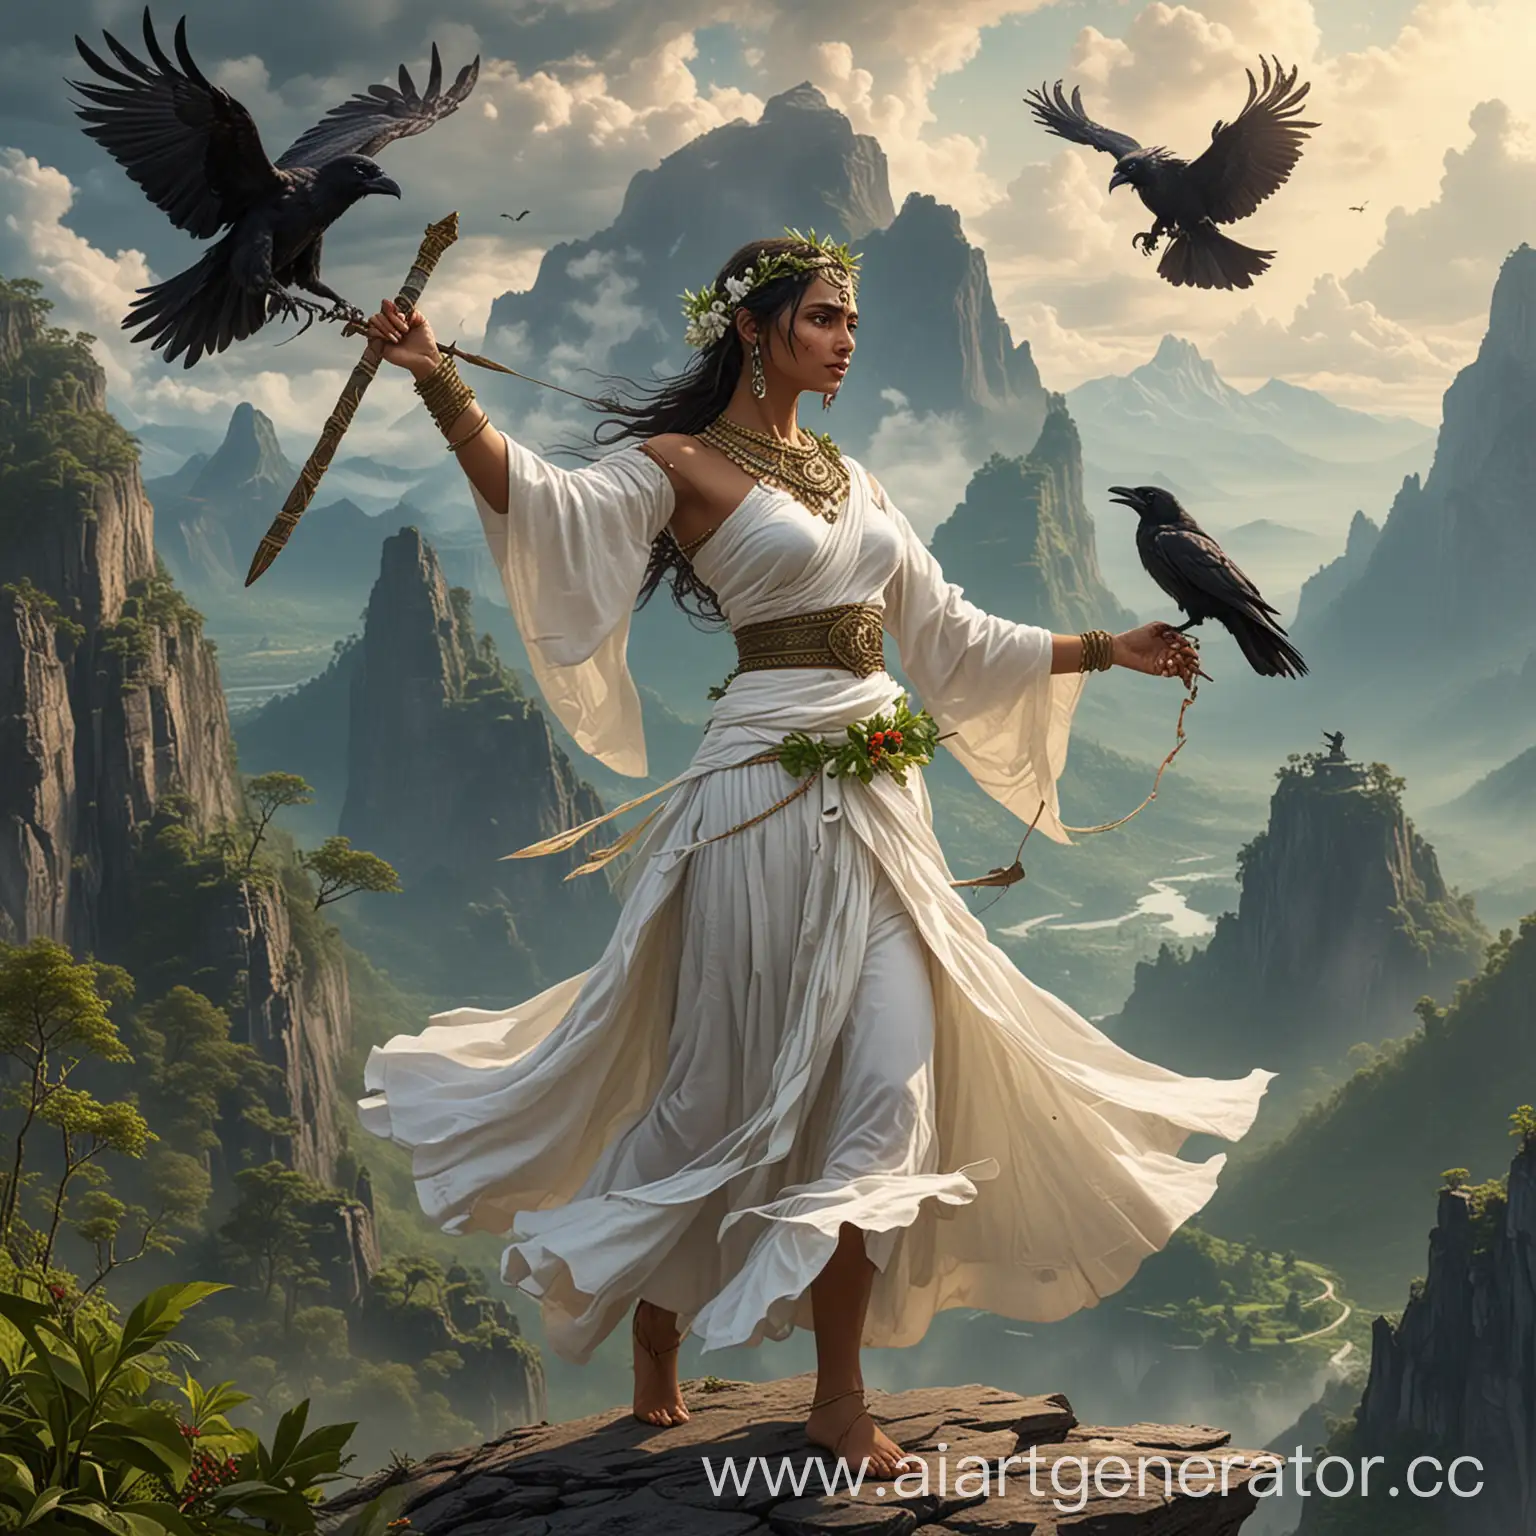 Majestic-Amazon-Queen-Dancing-with-Halberd-and-Raven-on-Mount-Kailas